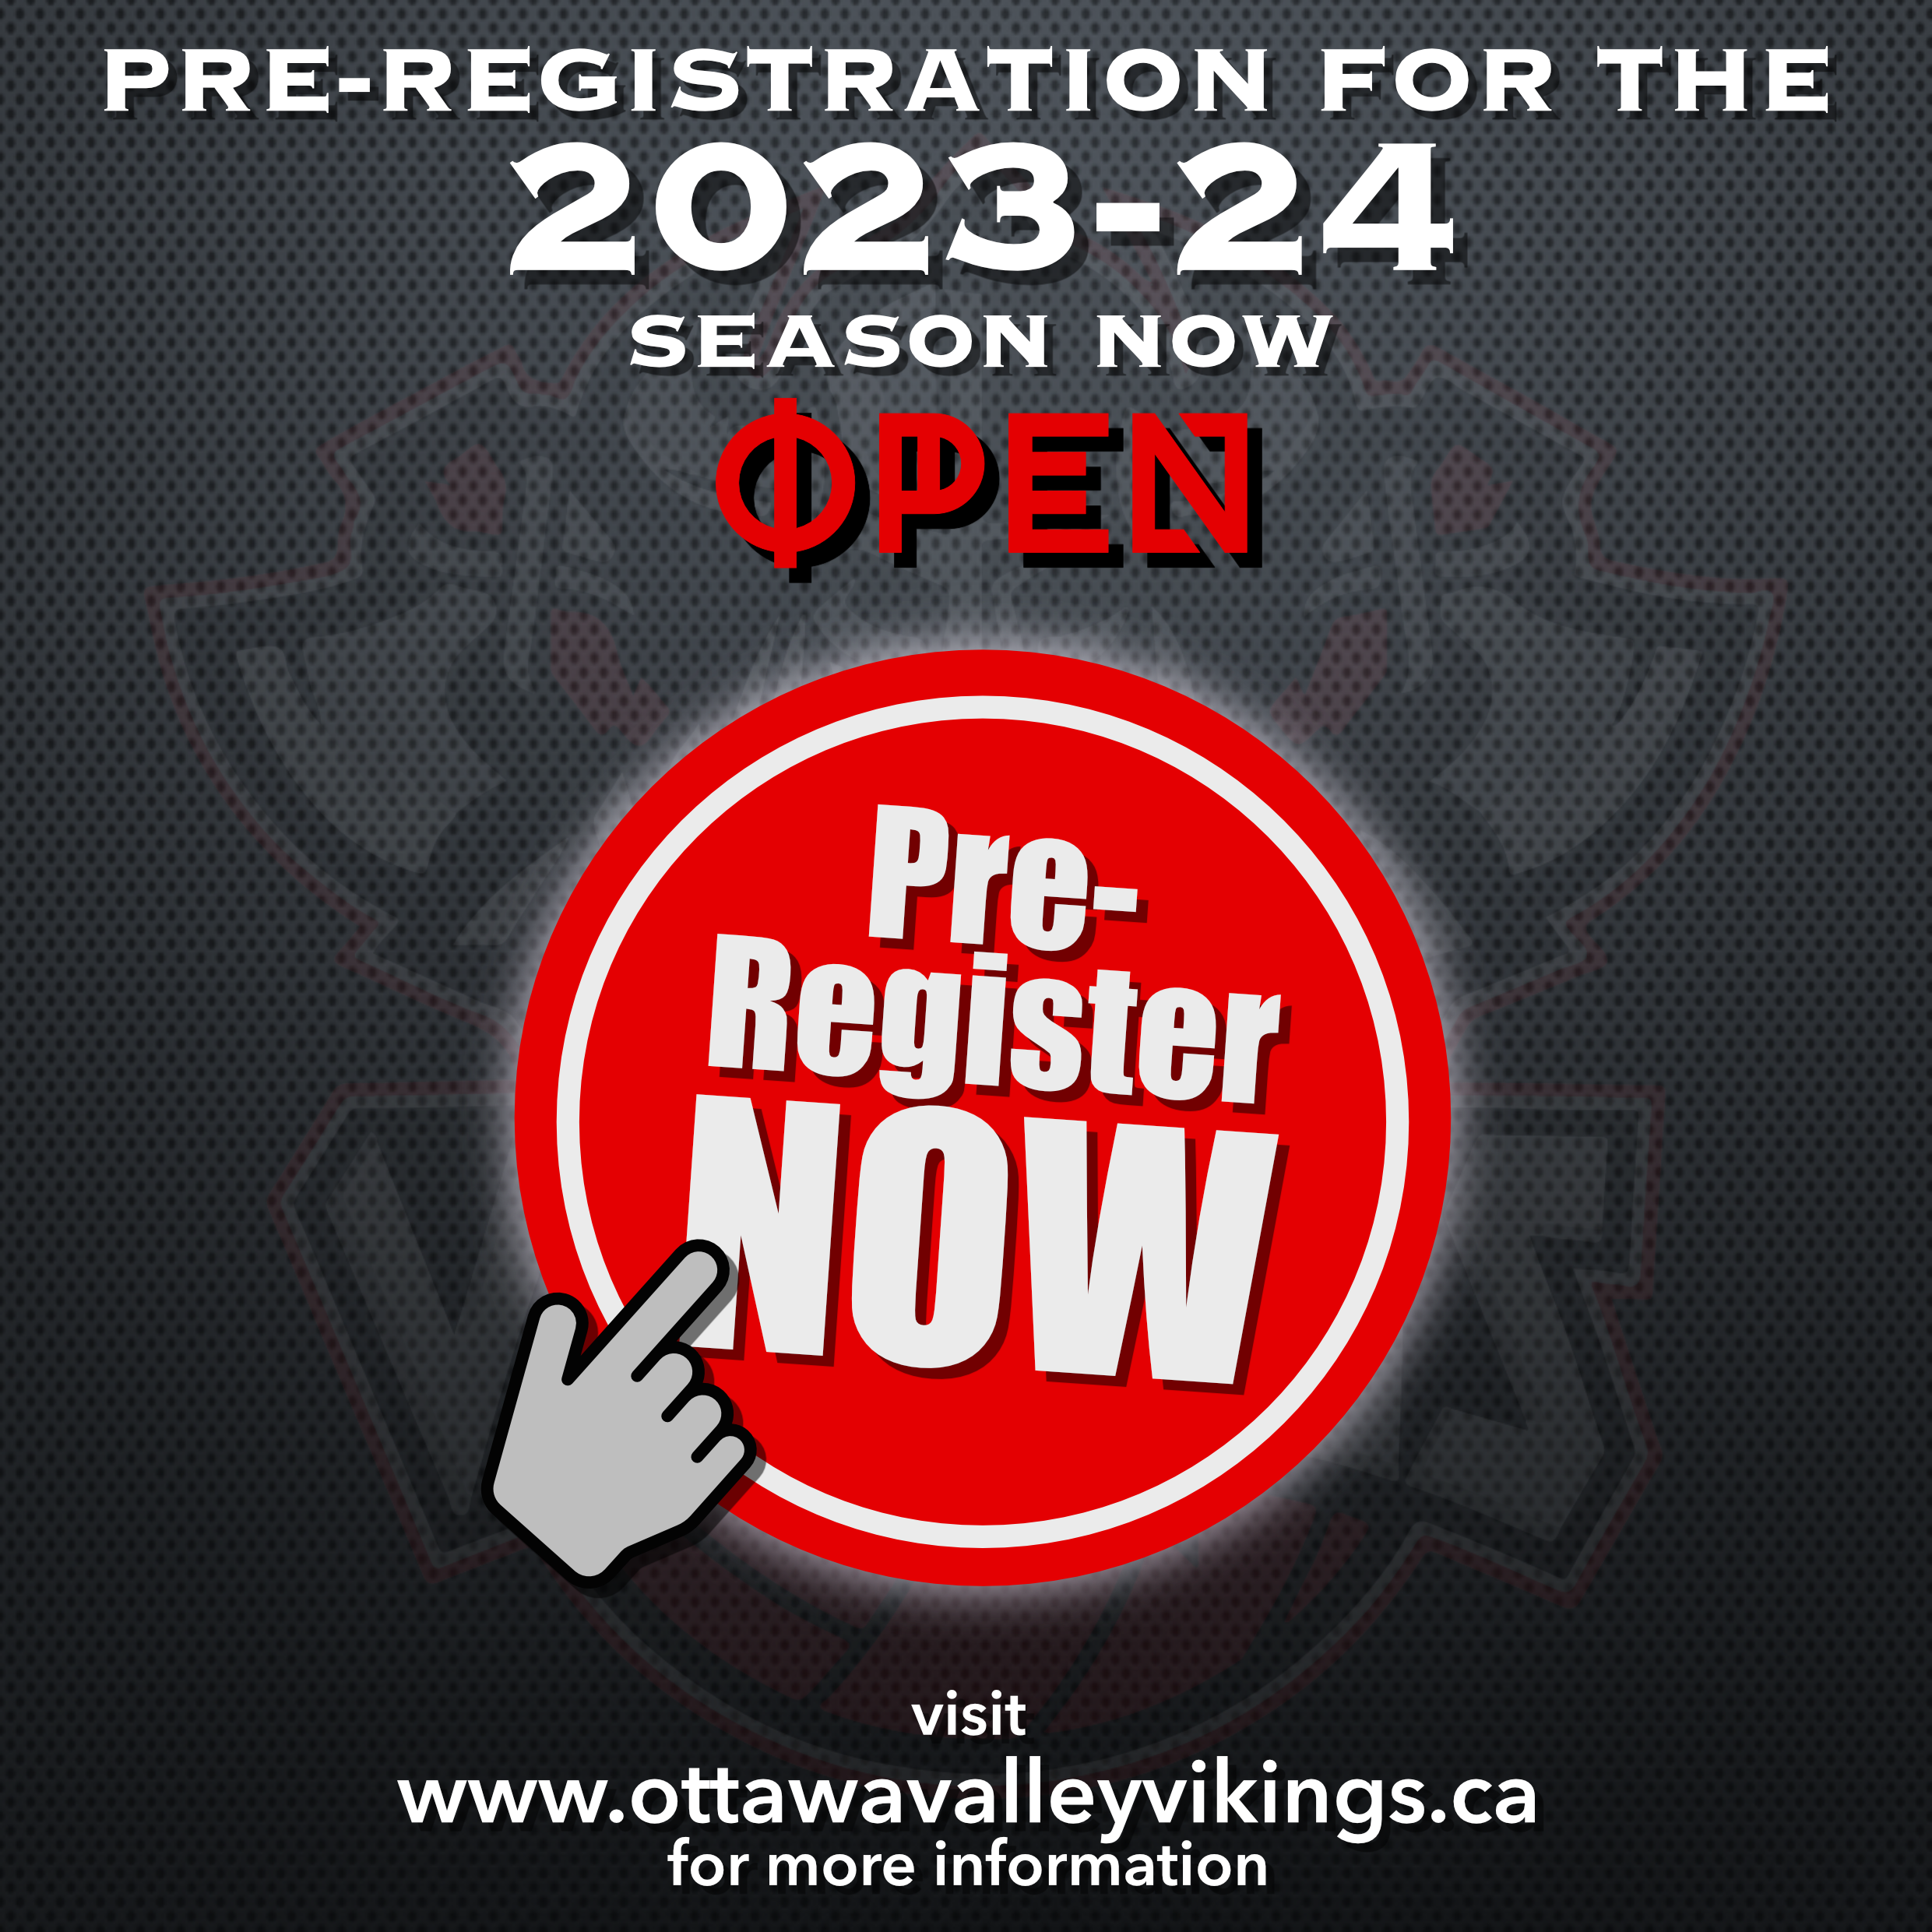 Pre-Registration for the 2023-24 Season Now Open